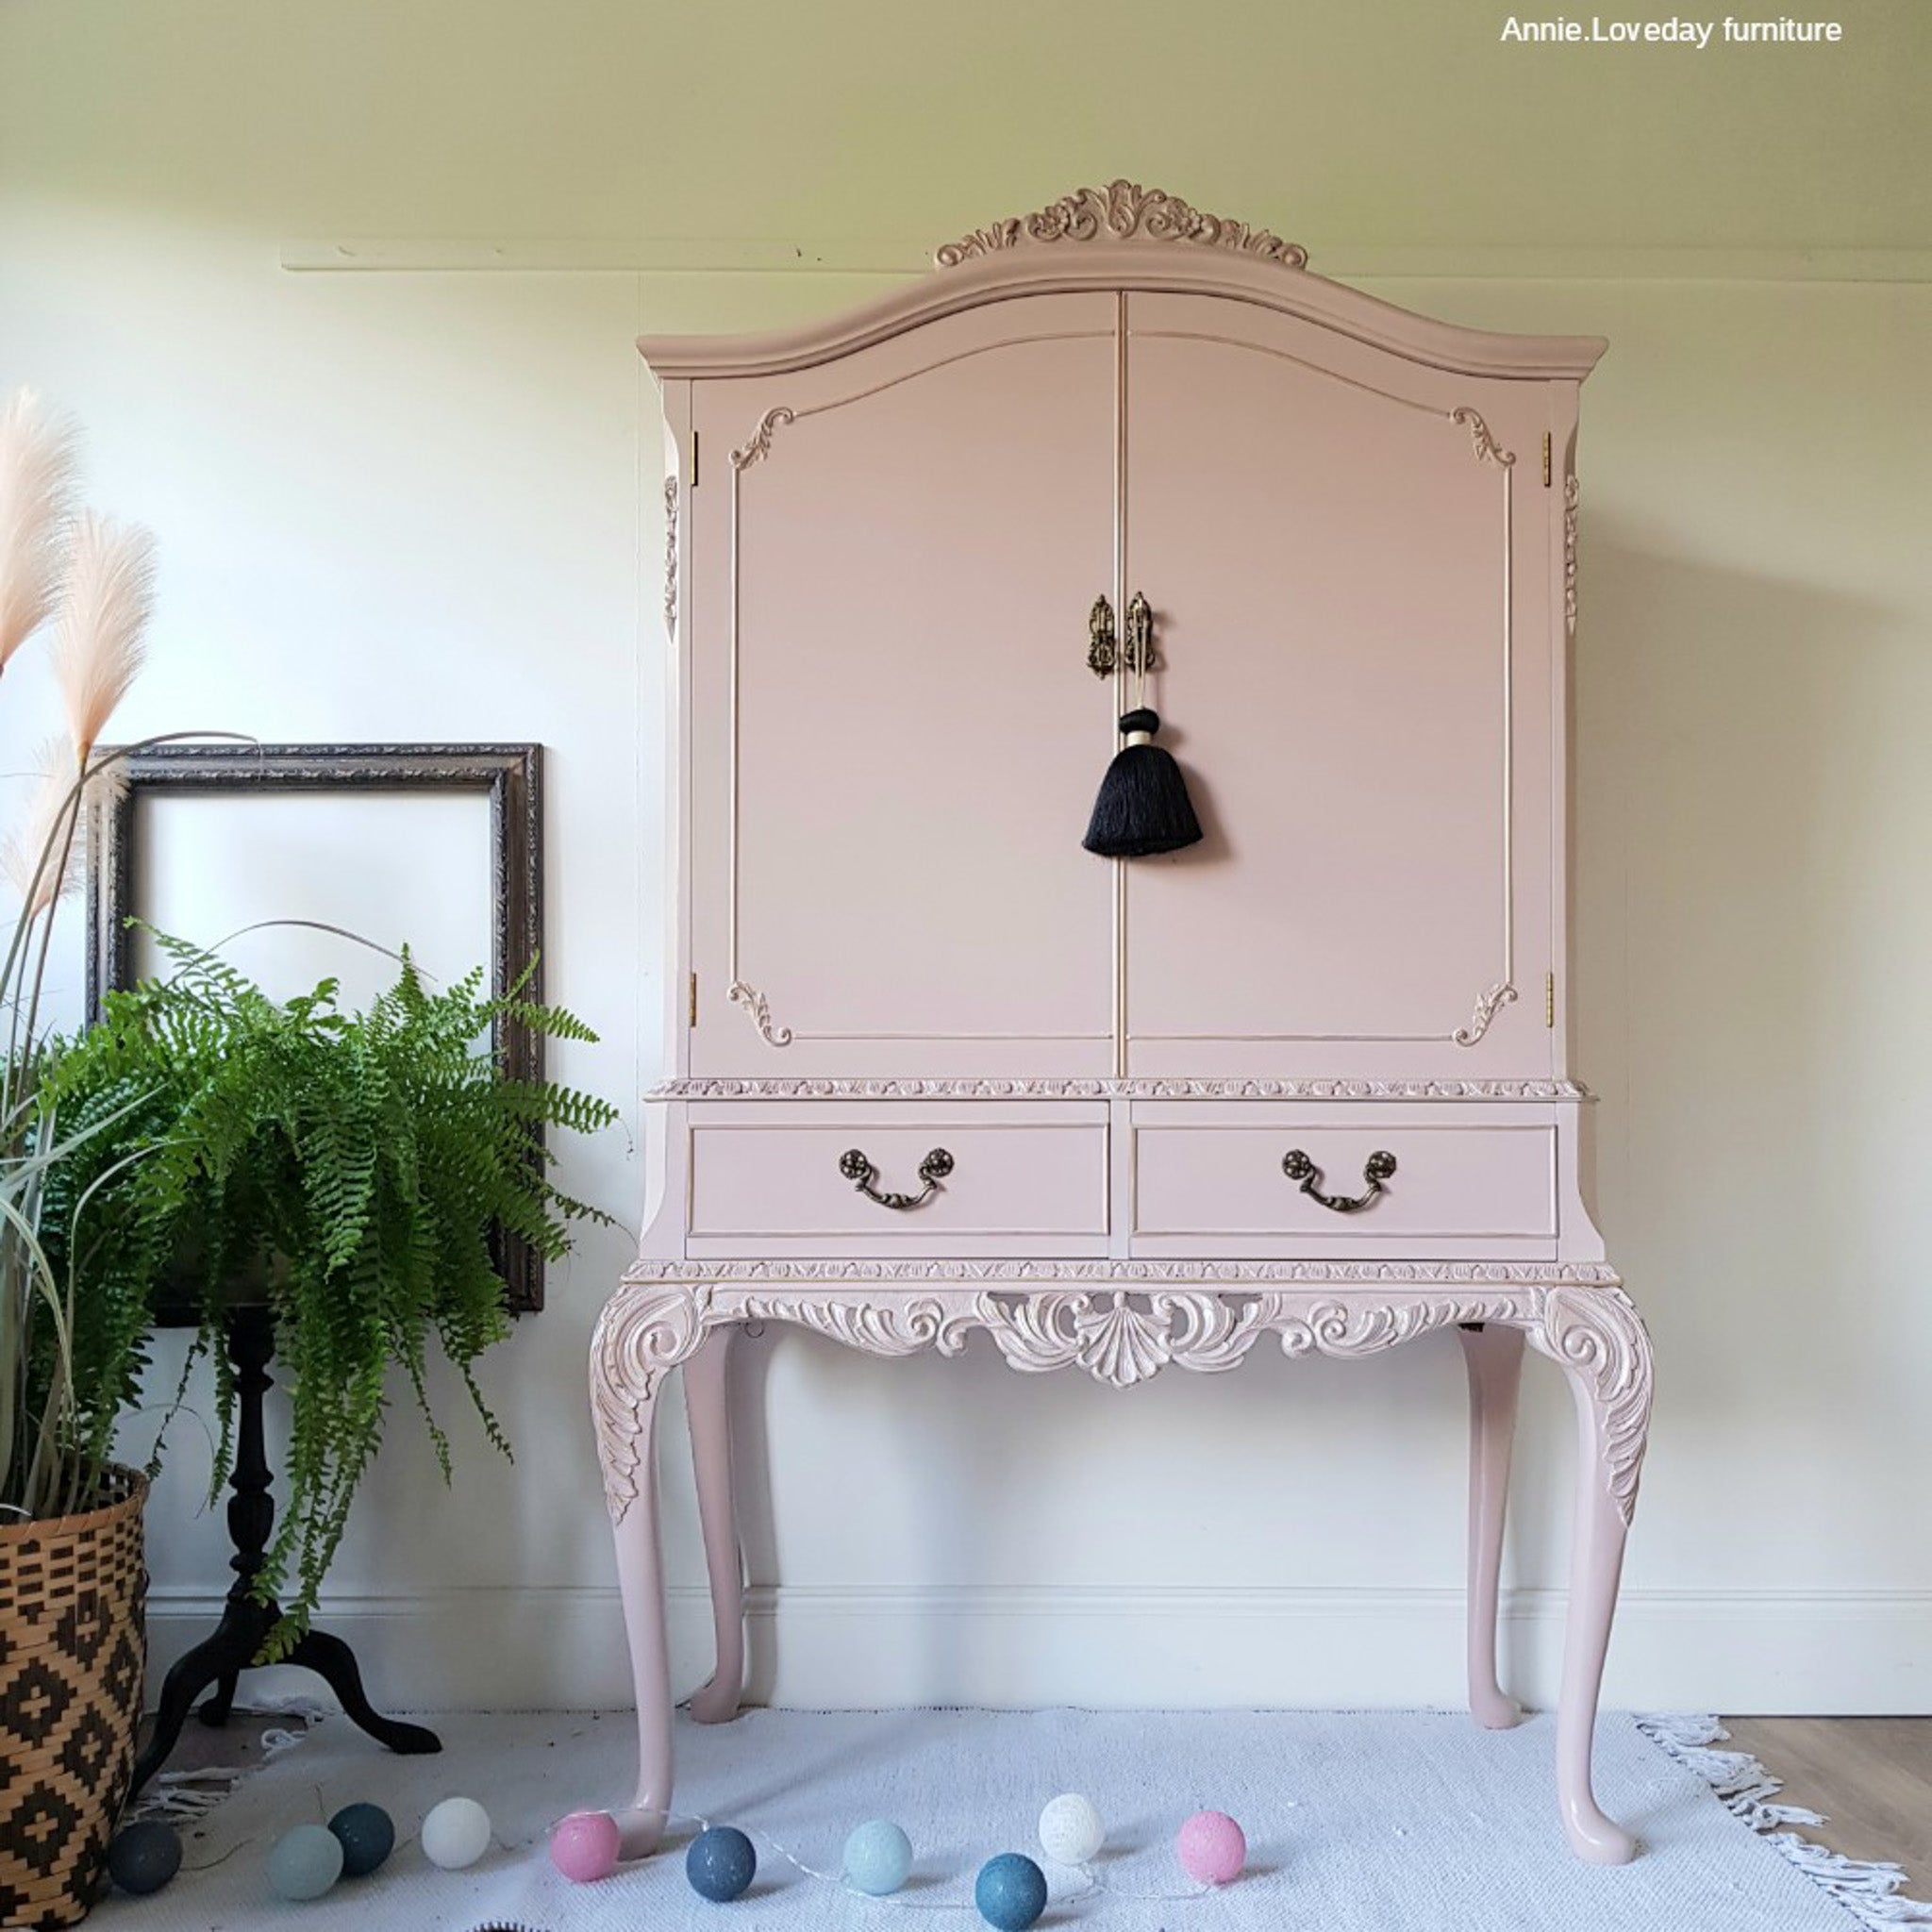 A vintage armoire refurbished by Annie Loveday Furniture is painted in Dixie Belle's Tea Rose chalk mineral paint.